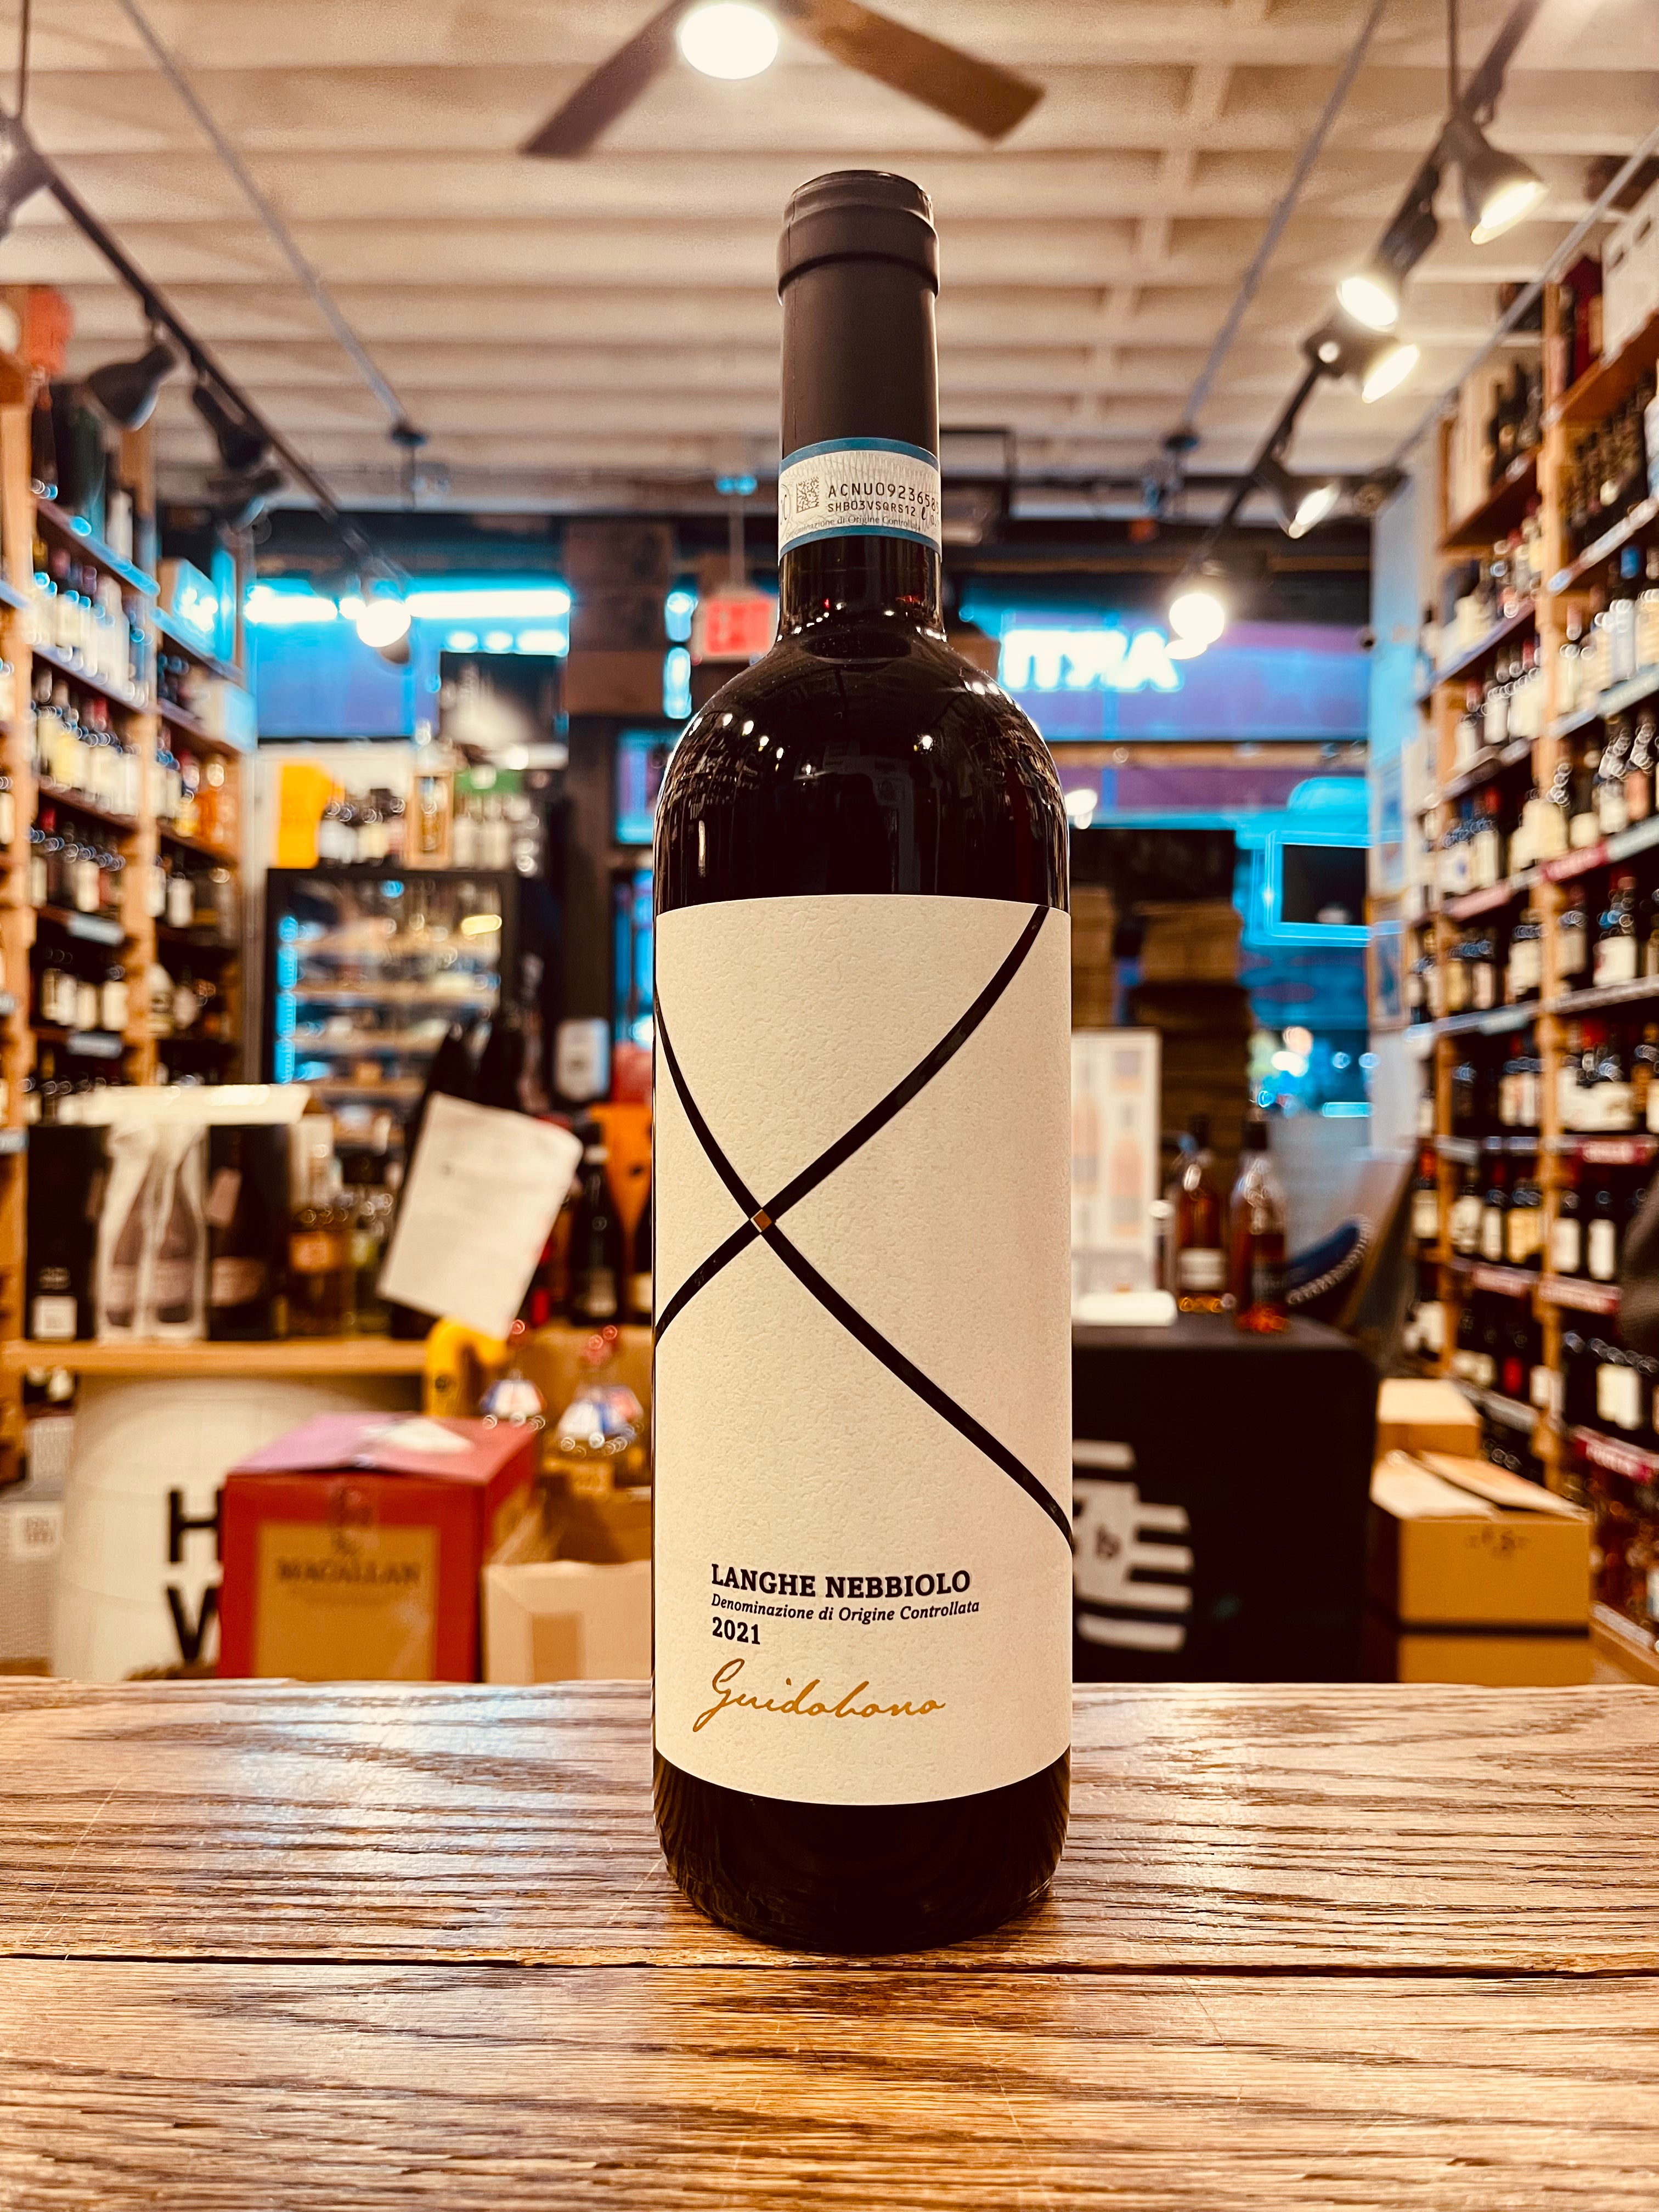 Guidobono Langhe Nebbiolo 750mL tall dark wine bottle with a large white label and black X across the front and black top